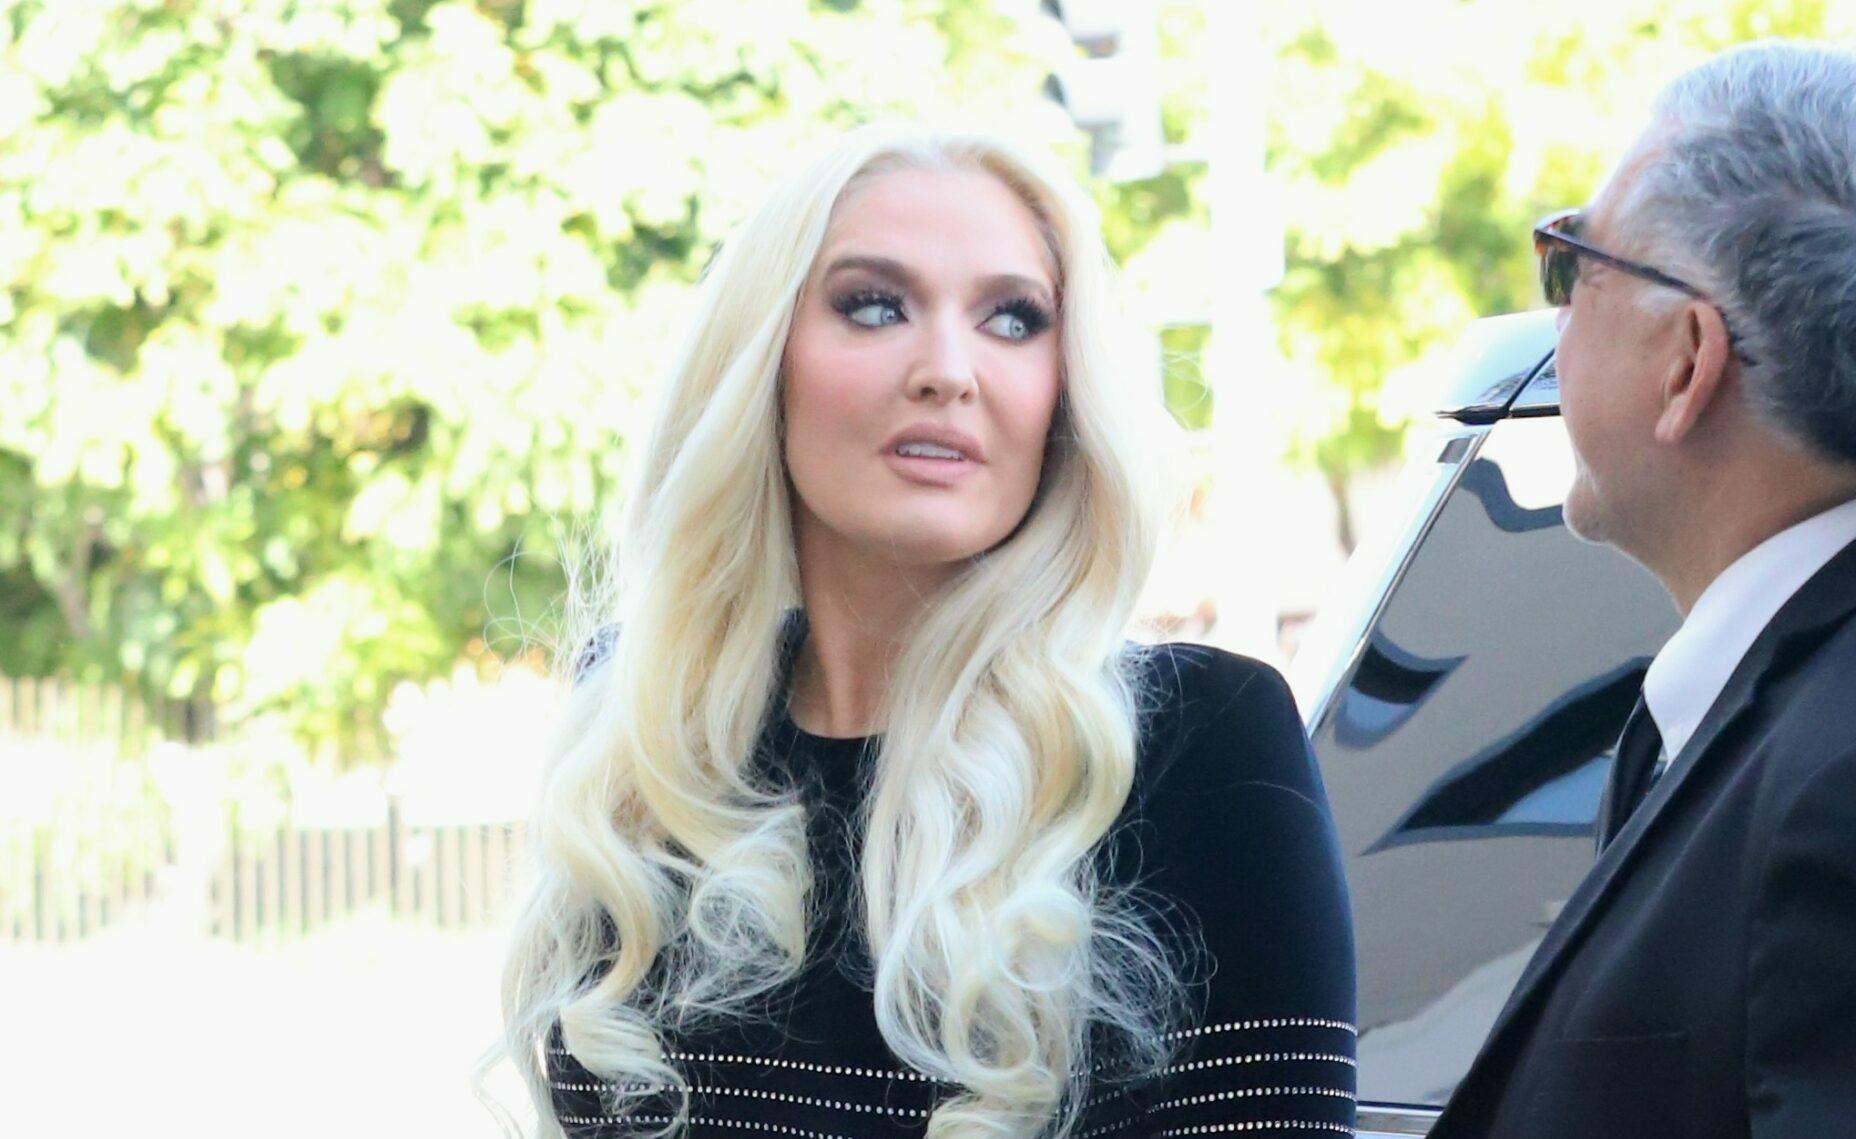 A classy Erika Jayne seen in full glam while filming for RHOBH